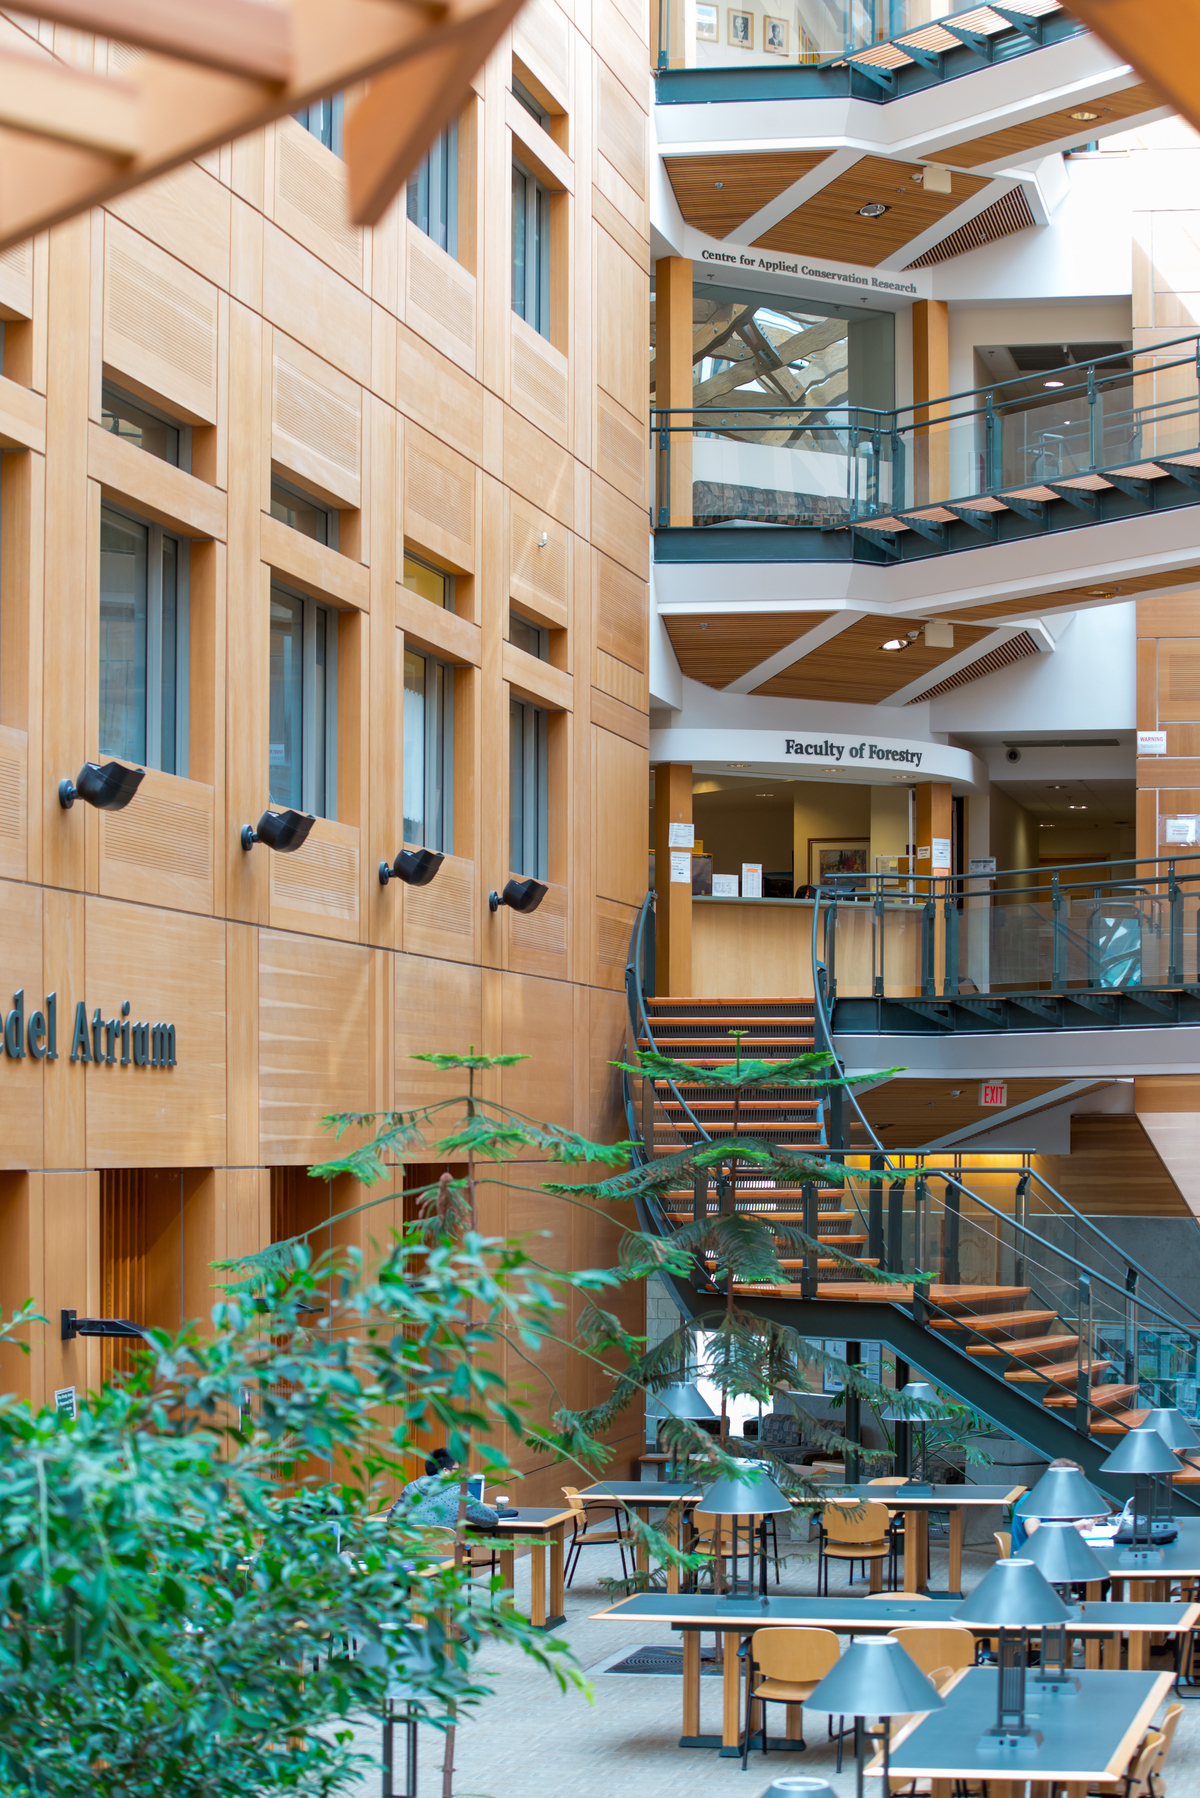 Multi storey mass timber and decorative lumber, including: wall panels, stair treads, parallel strand lumber (PSL) columns, wood trim, and millwork are shown in this interior daytime image of the UBC Forest Sciences Centre main atrium